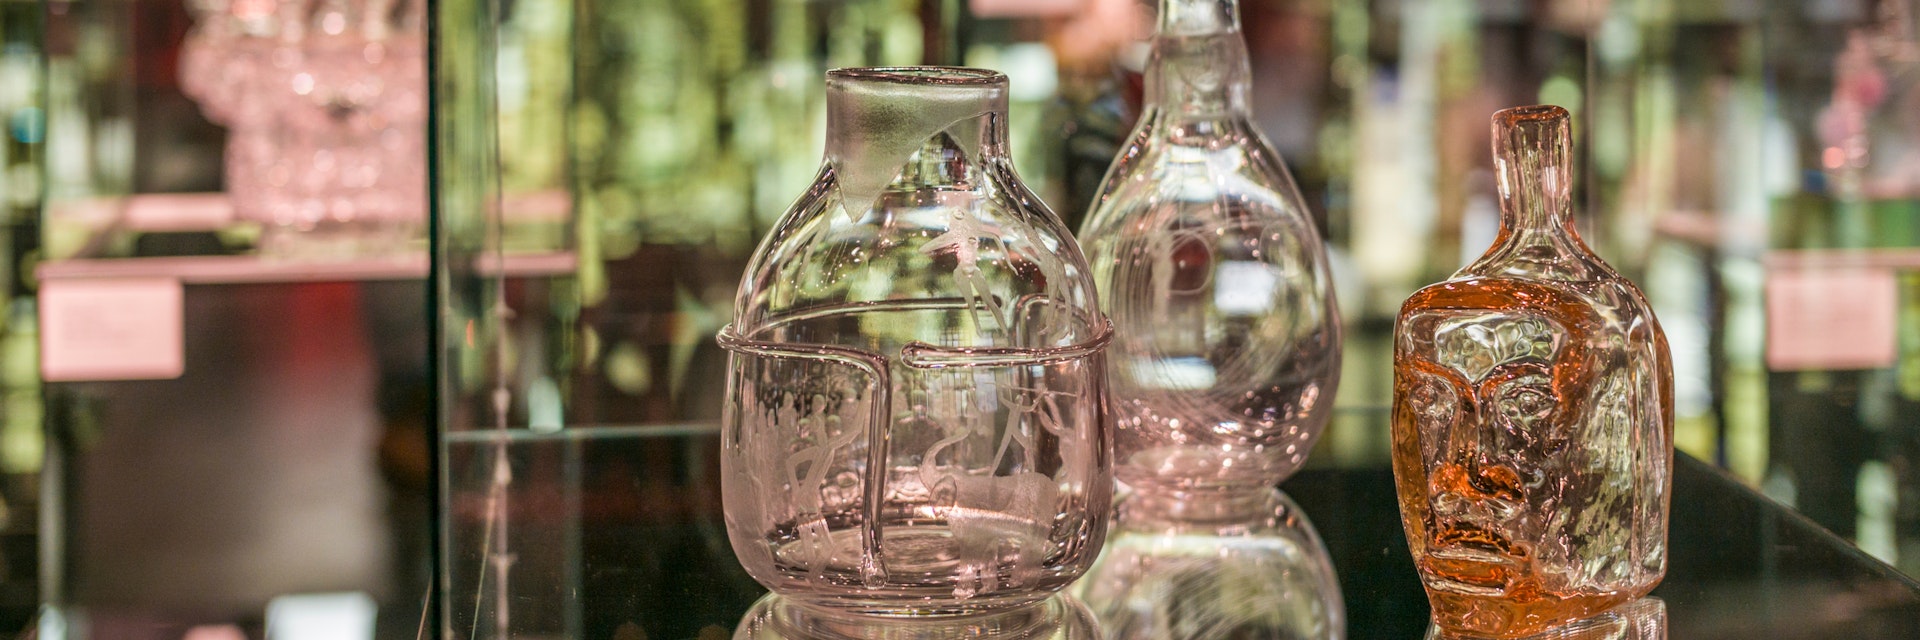 Glass on display at the Glasriket Glass Factory in Sweden.